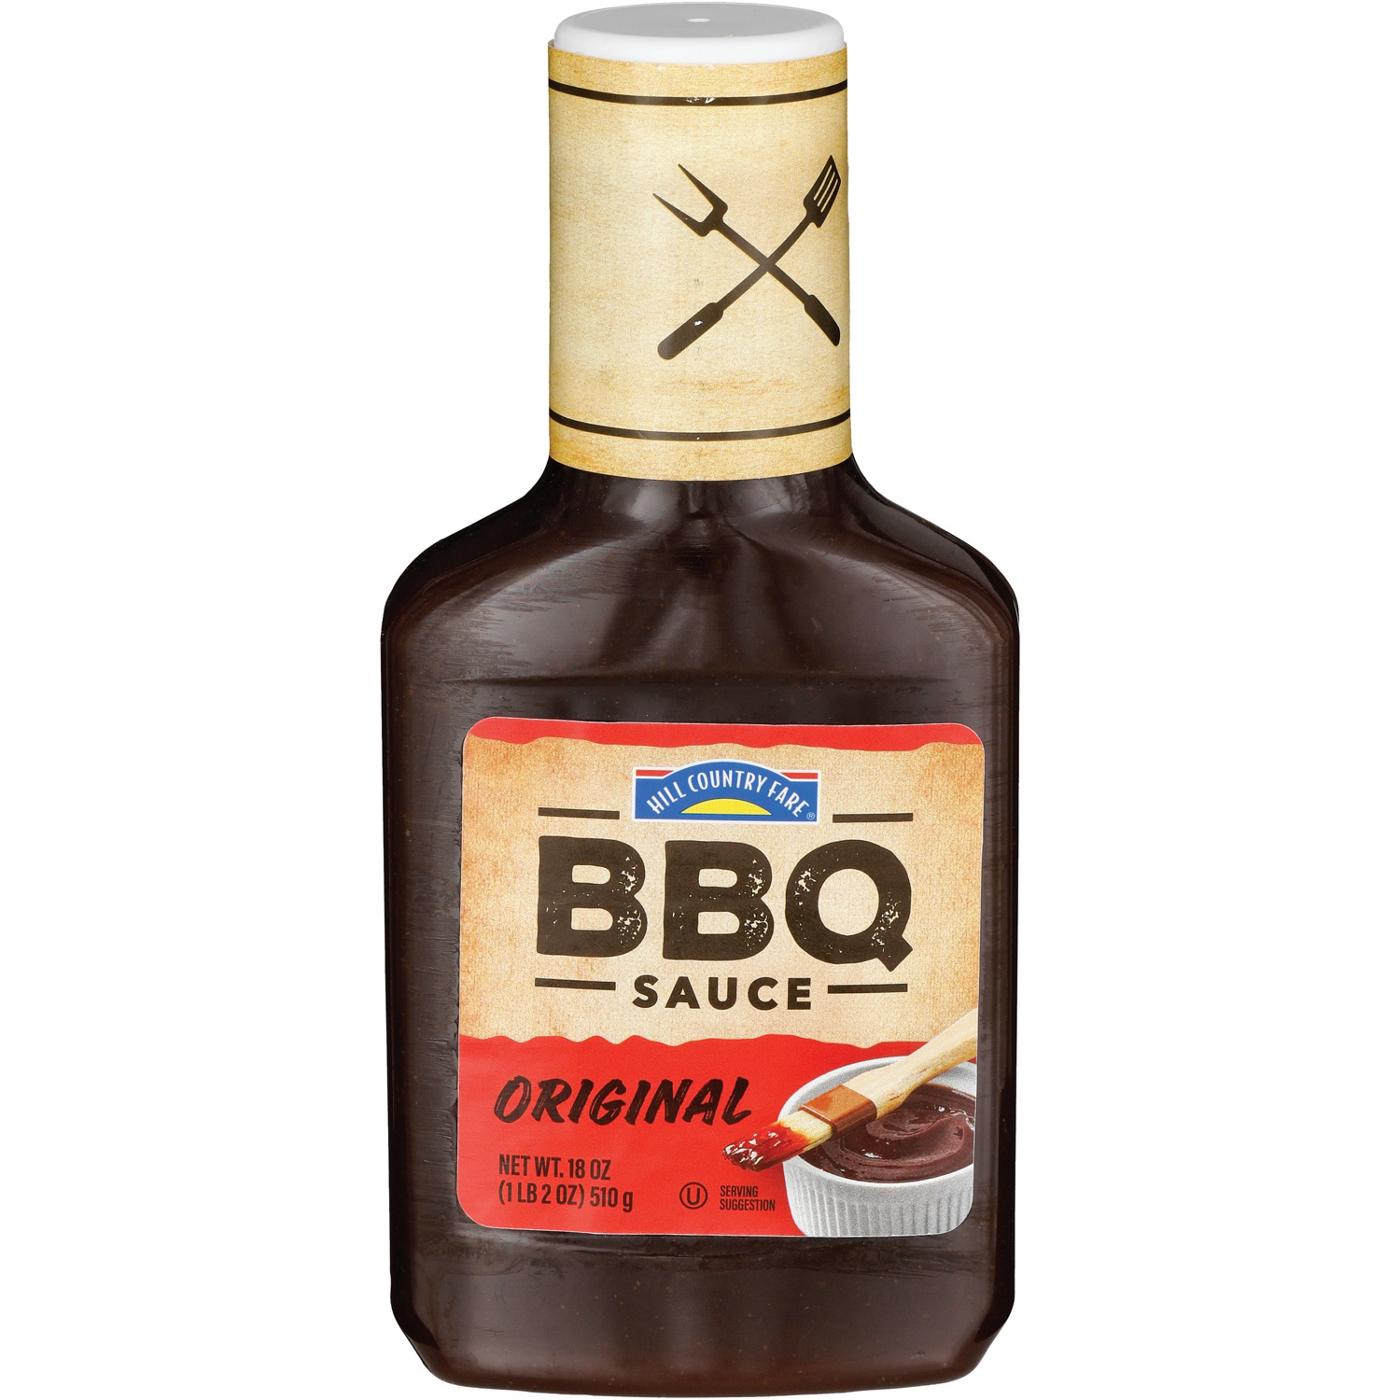 Hill Country Fare Original BBQ Sauce; image 2 of 2